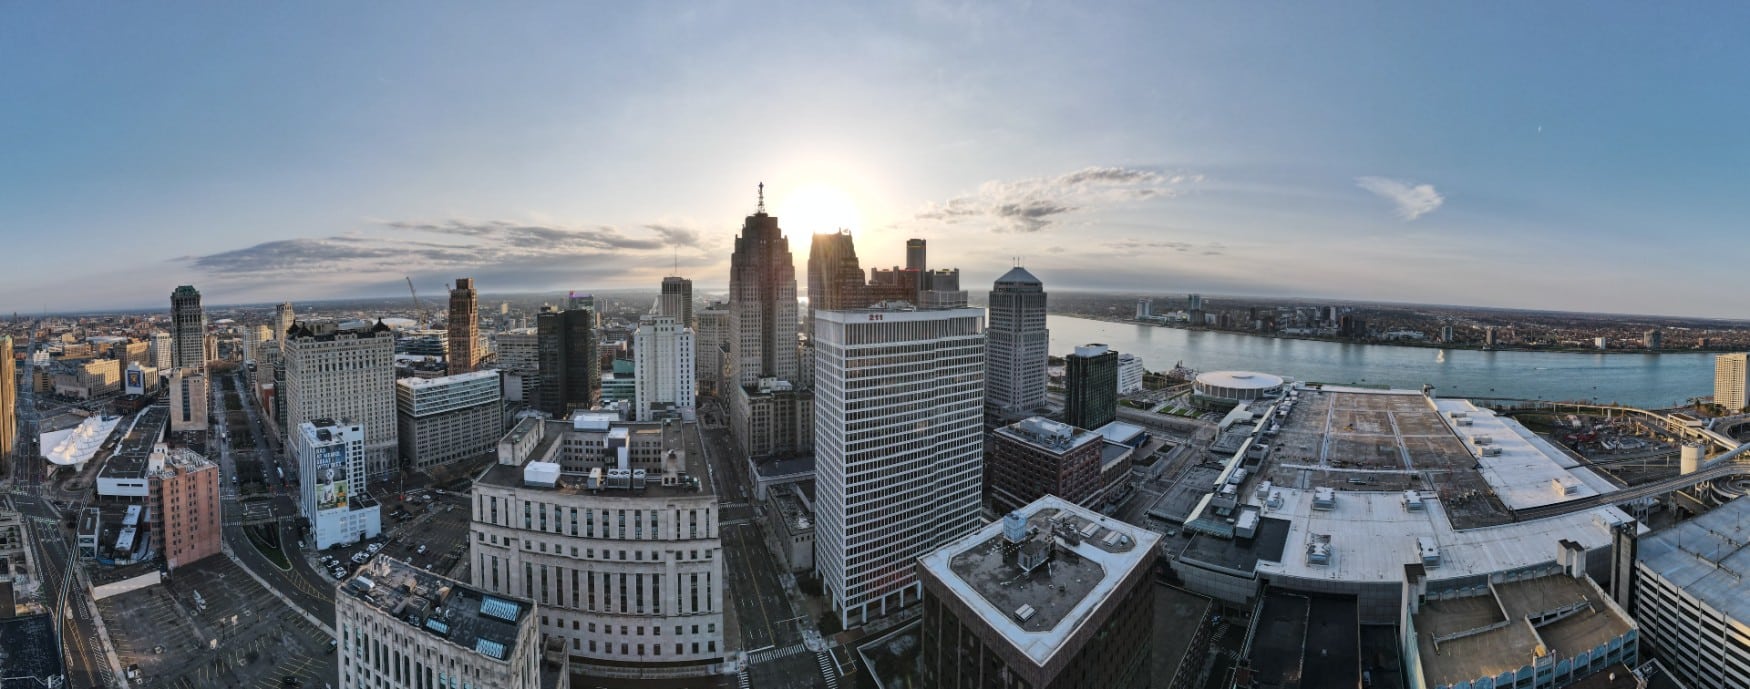 Detroit's Skyline As Seen From Above